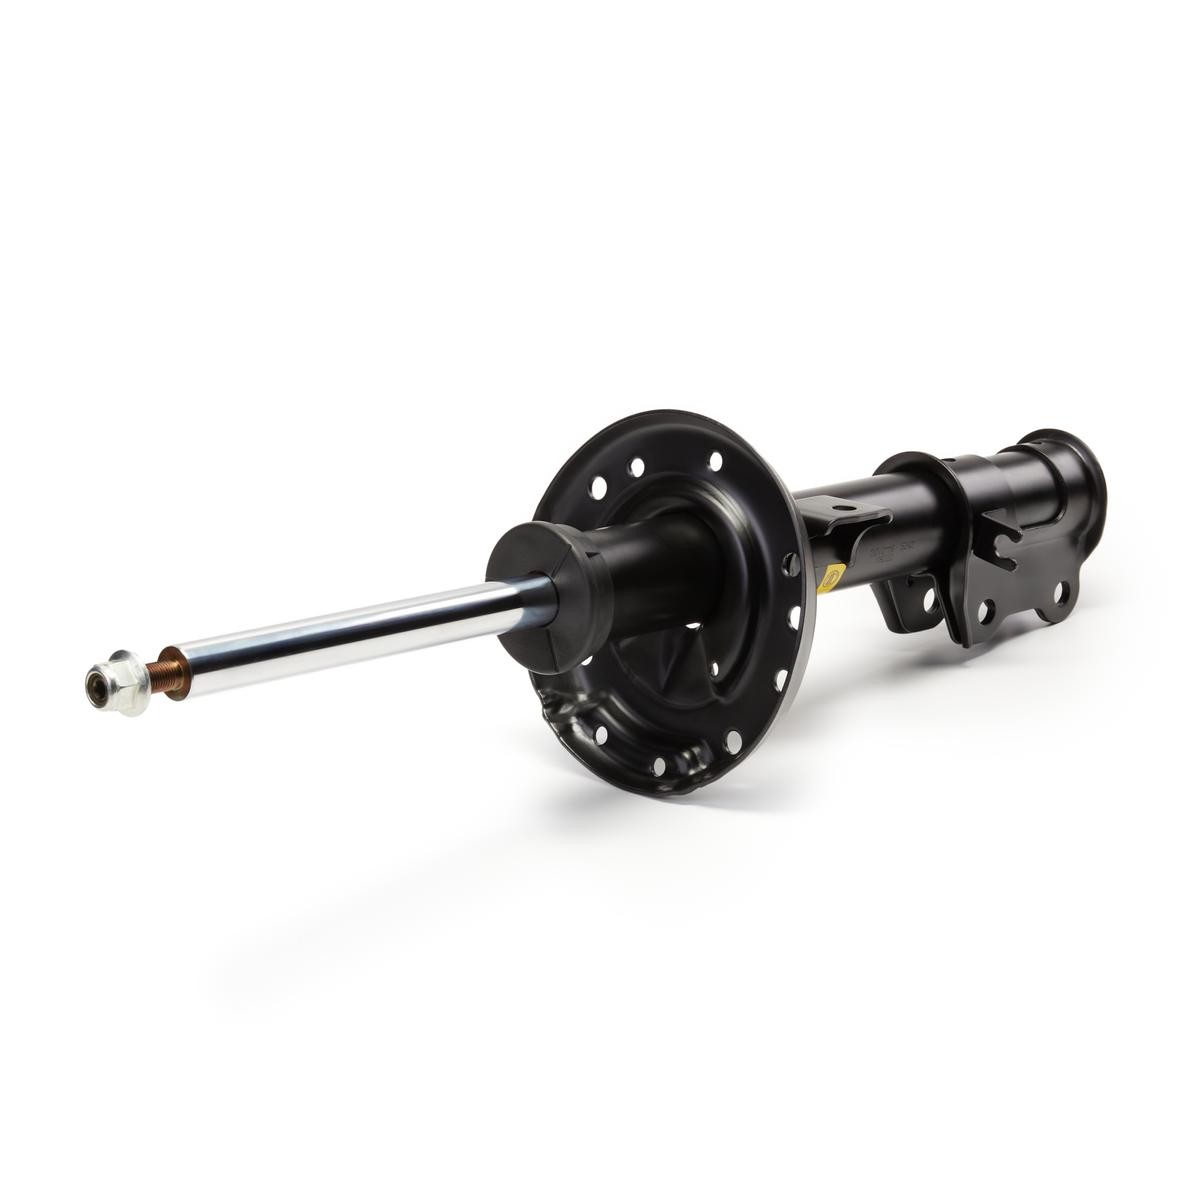 MONROE G8108 Shock absorber Gas Pressure, Twin-Tube, Suspension Strut, Top pin, Bottom Clamp